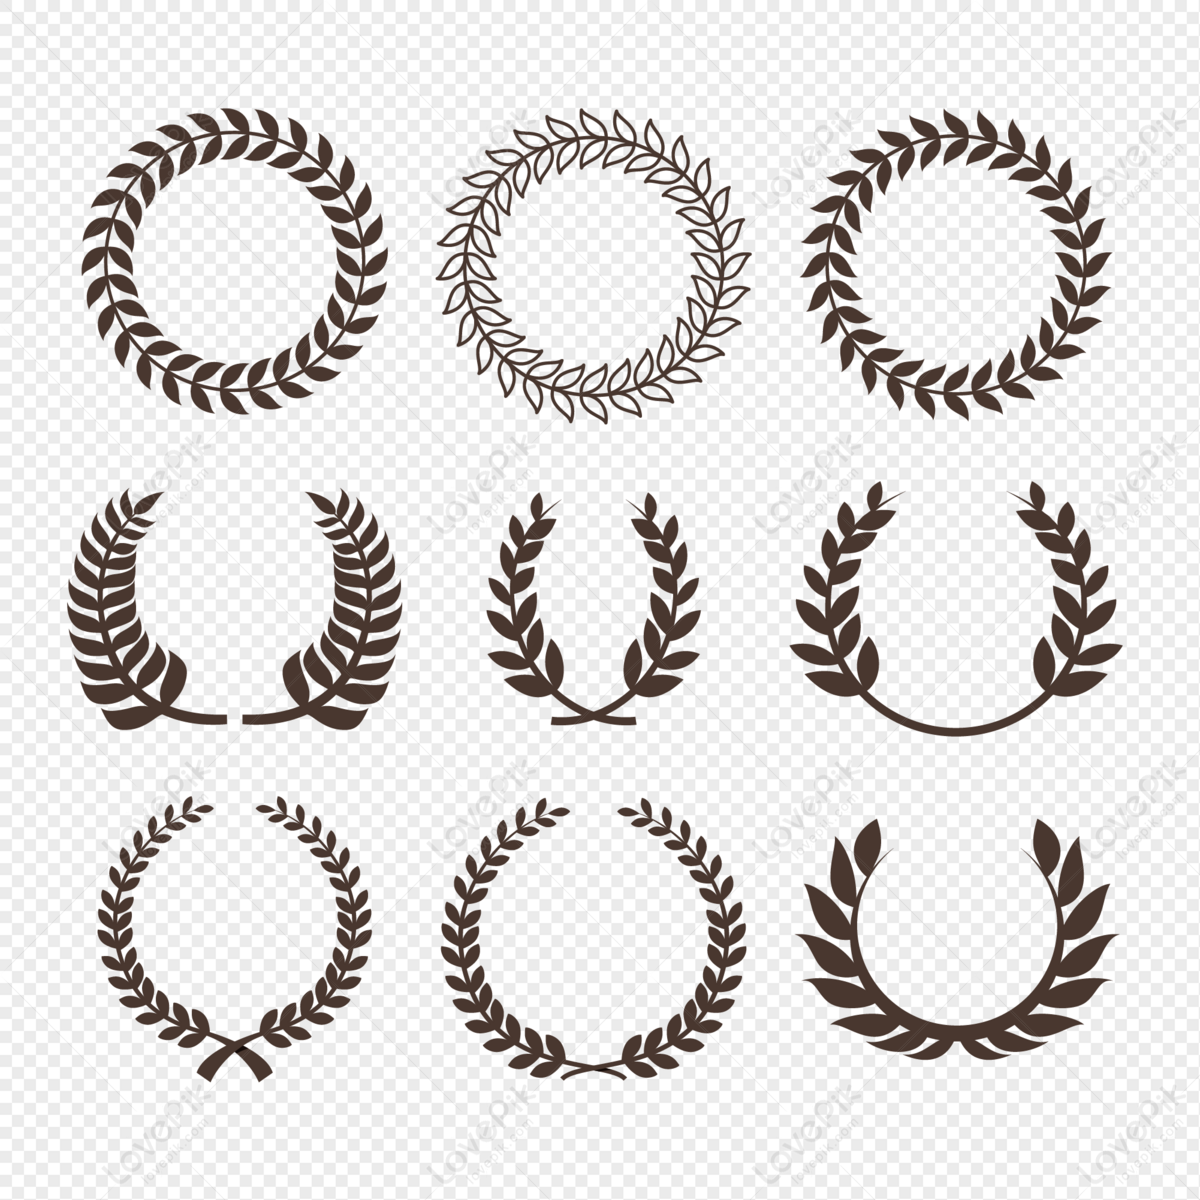 Black leaves branches border, black branches, laurel wreath, material png image